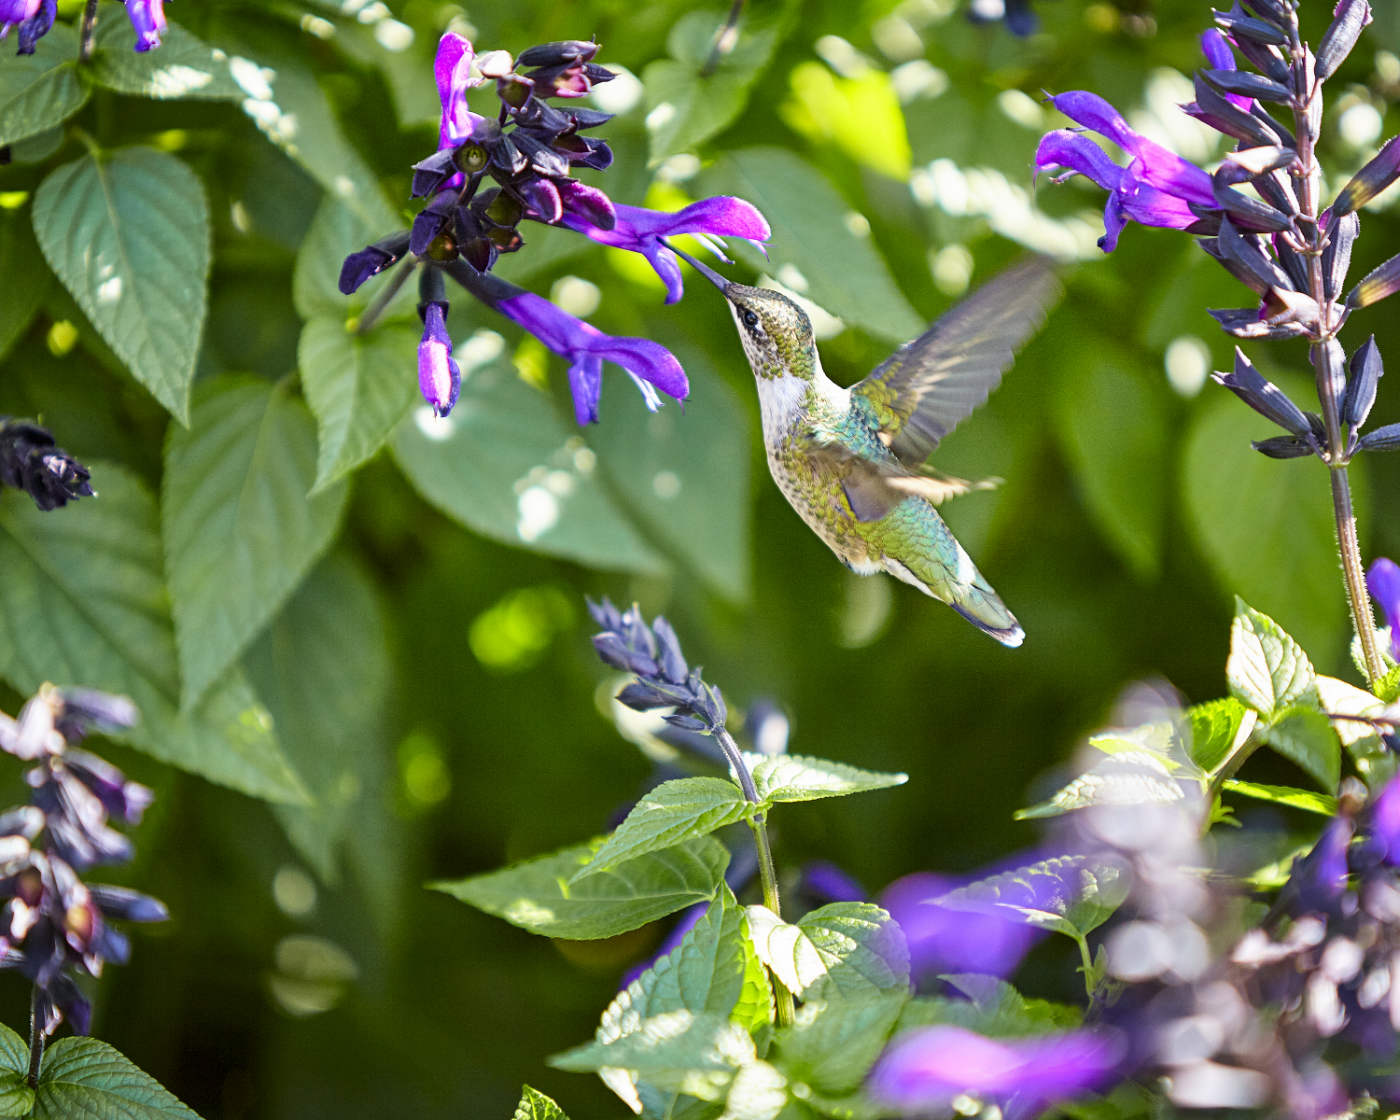 slender bird aloft with wings outstretched with beak going into a violet flower blossom with green leafy background